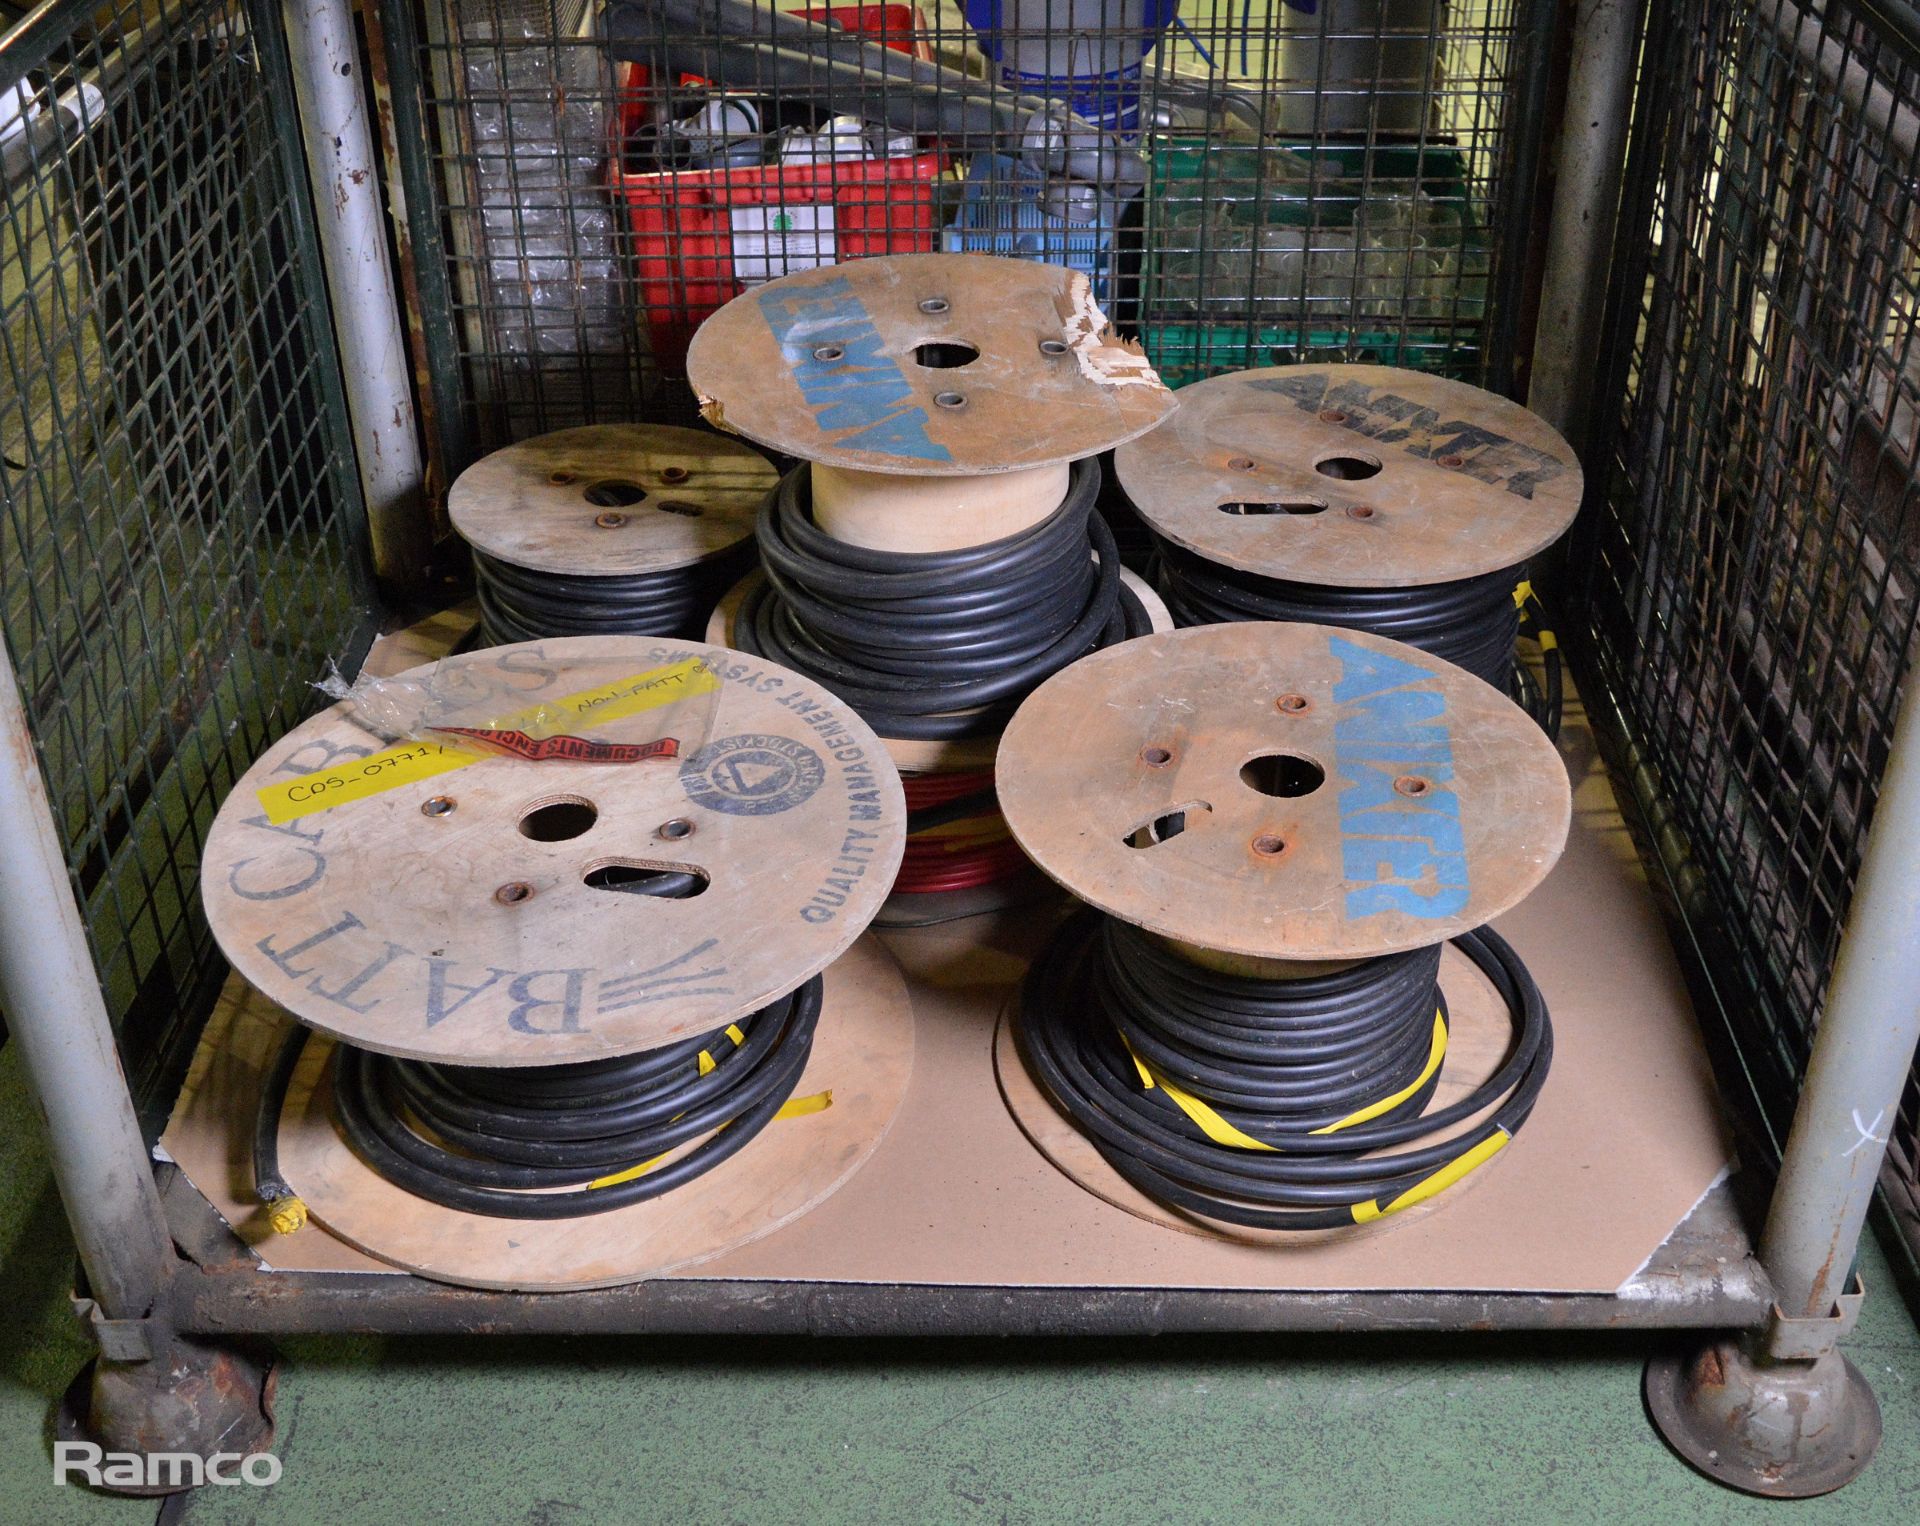 Various reels of miscellaneous cable - unknown lengths